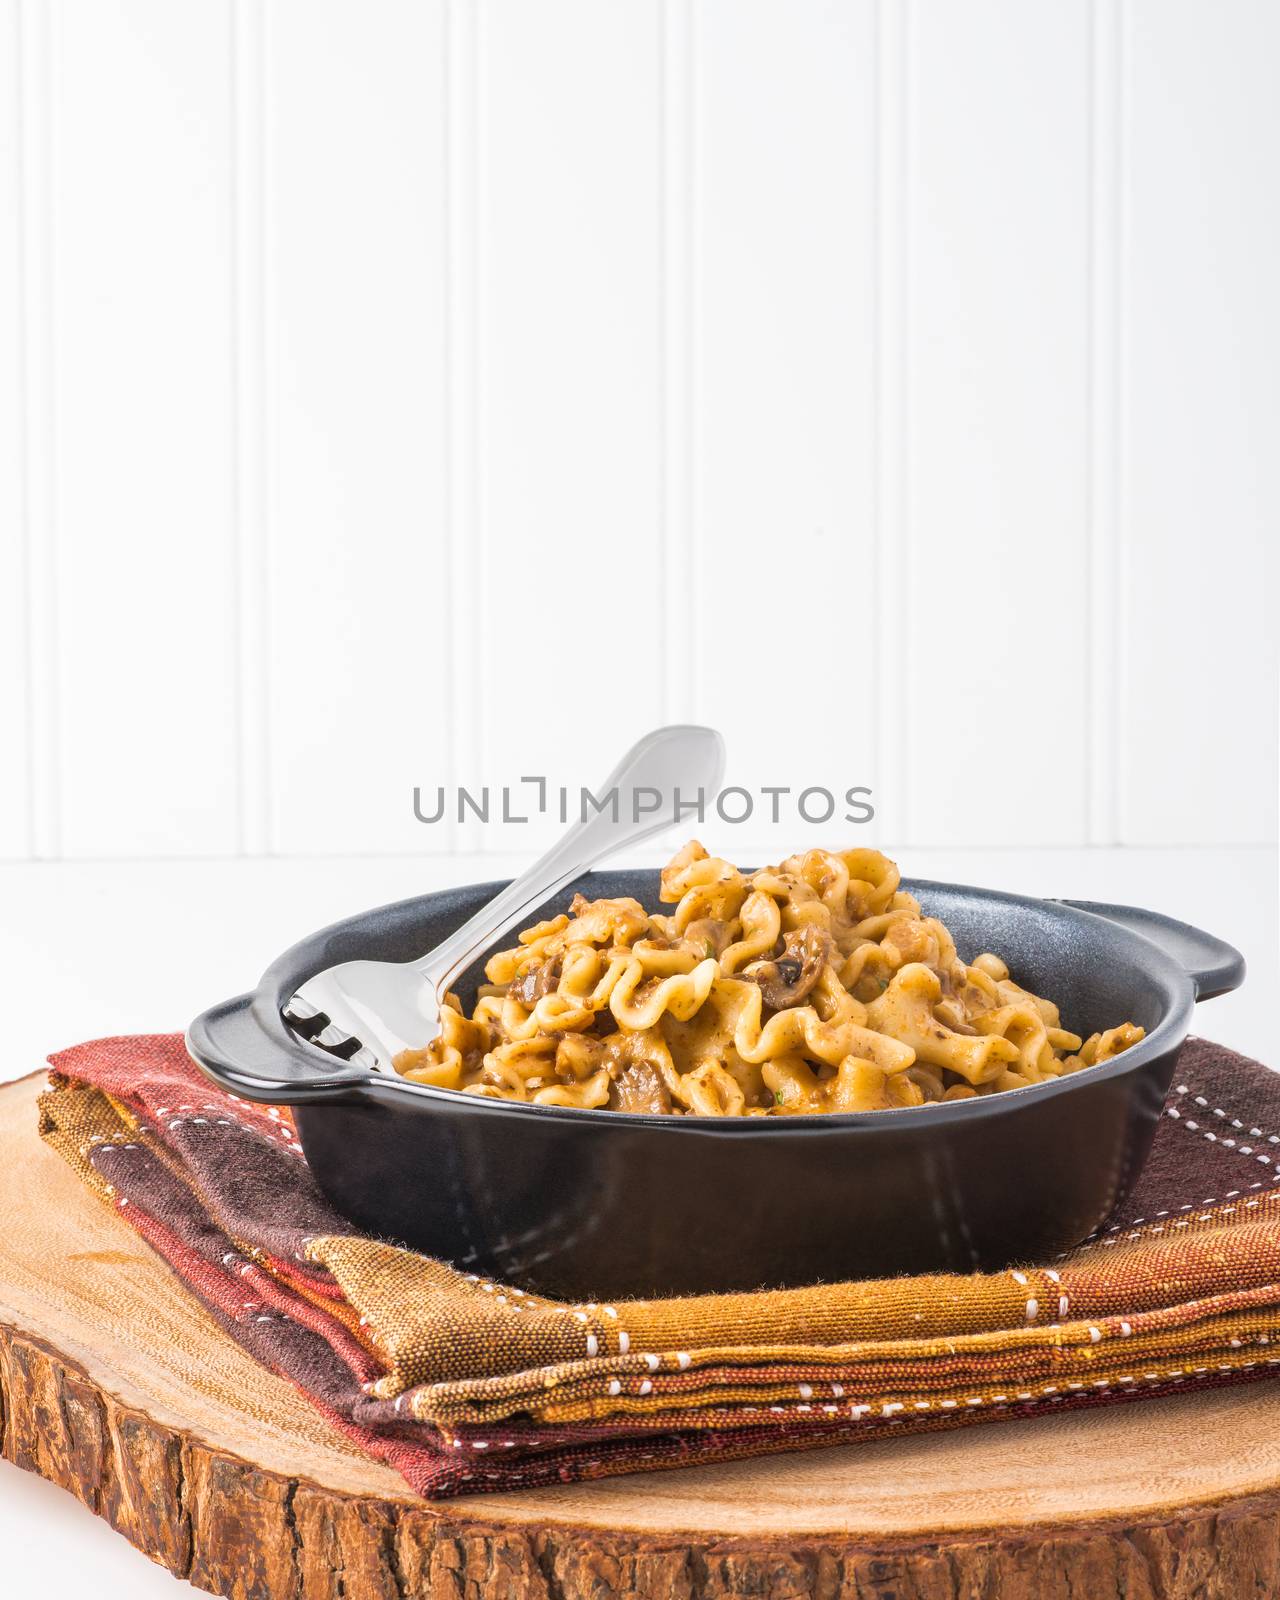 Serving of beef stroganoff photographed in portrait orientation for ample copy space.